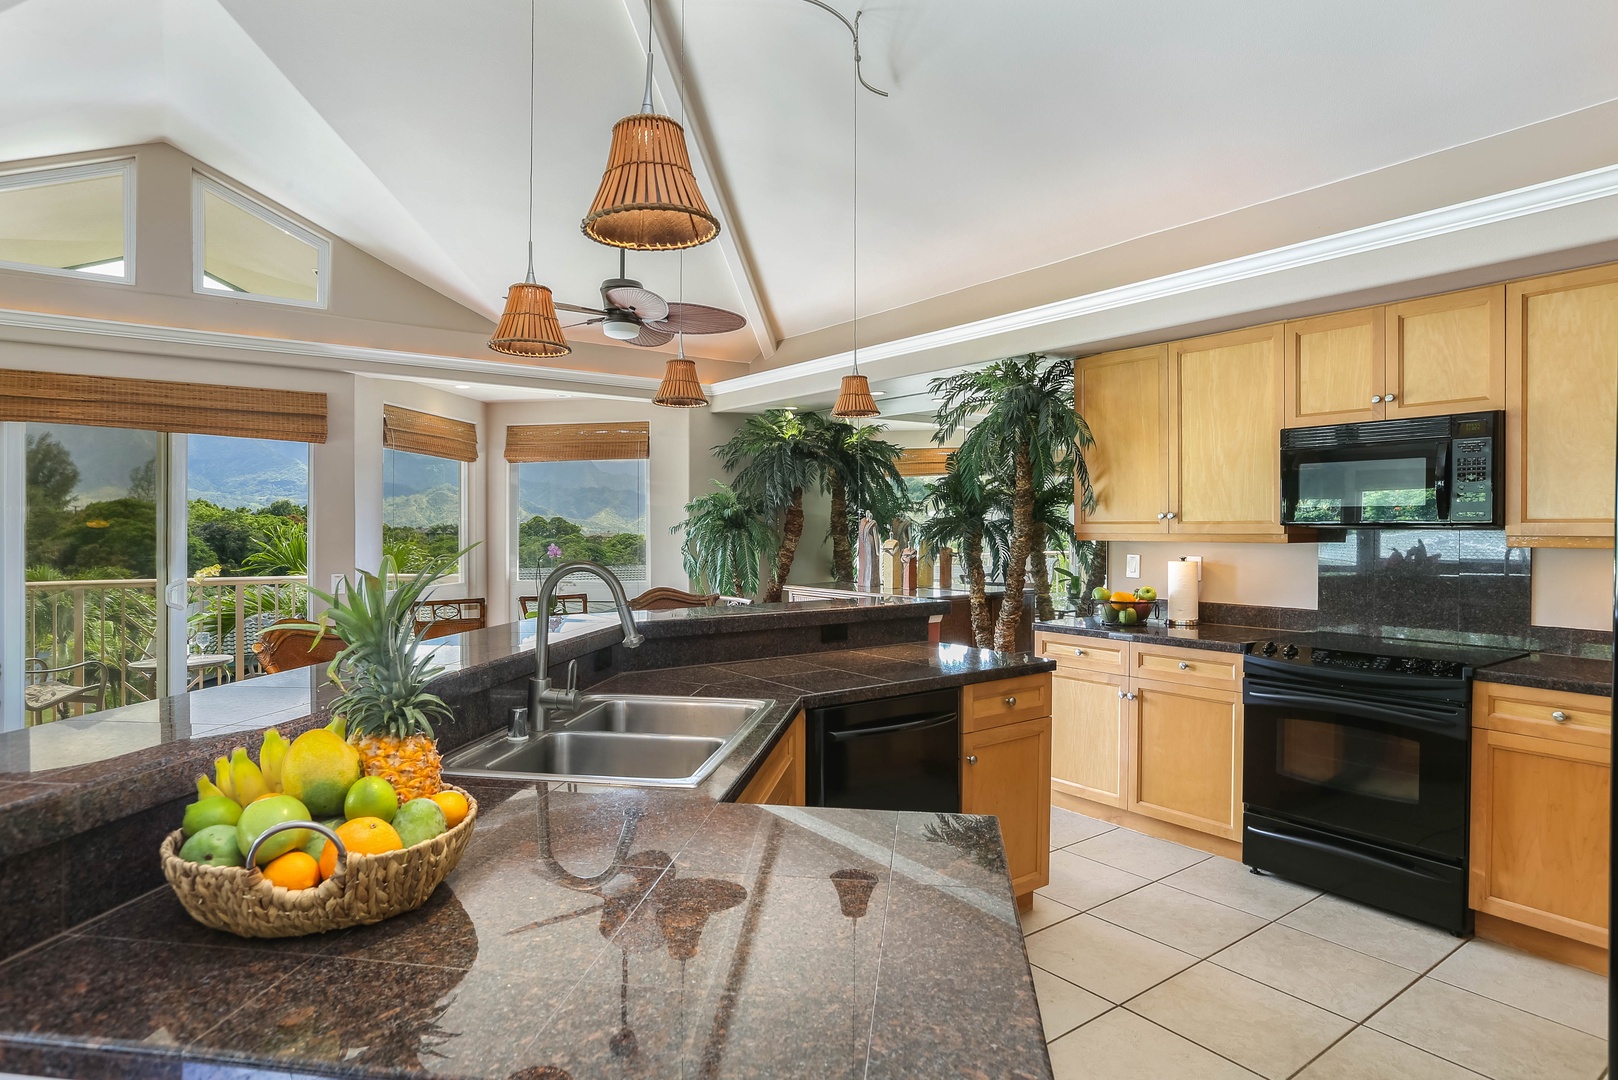 Princeville Vacation Rentals, Nohea Villa - Fully Equipped Kitchen